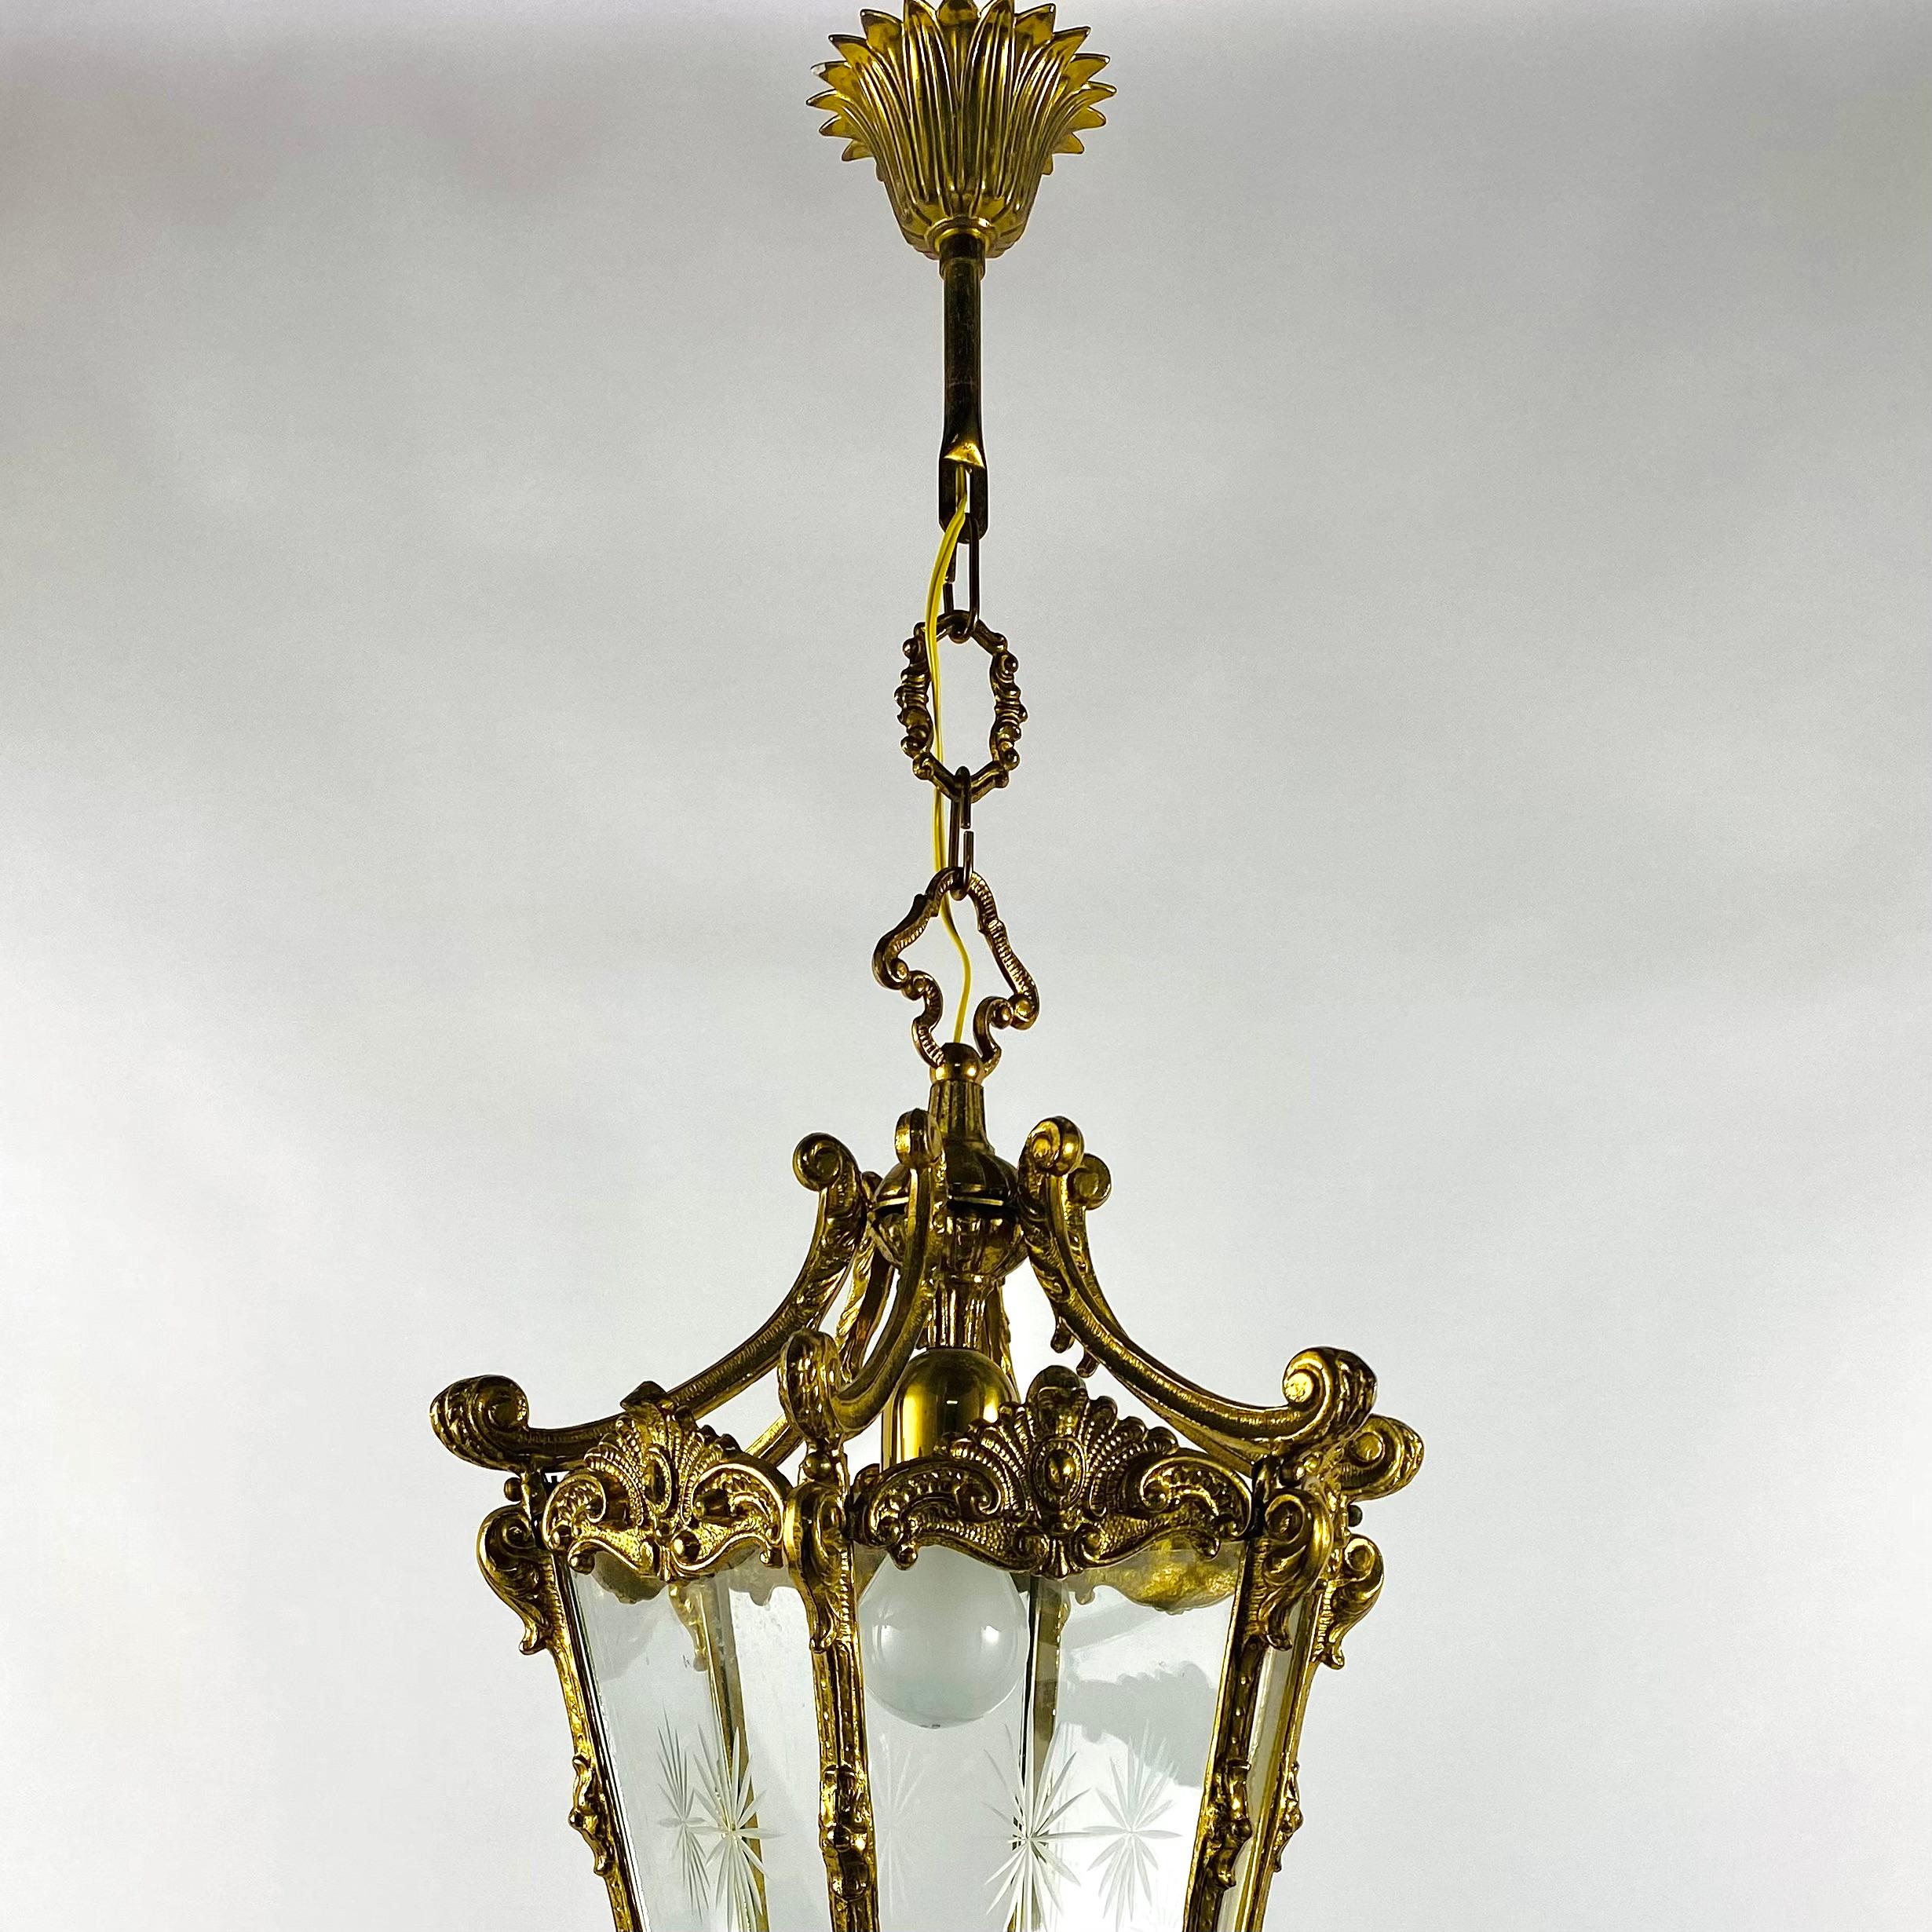 Amazing gilded bronze antique hall lantern with one lamp surrounded by sectional convex tapering glass panels and held within a foliated scrolling framework with decorative central pierced leaves and open scrolling canopy, having the original chain